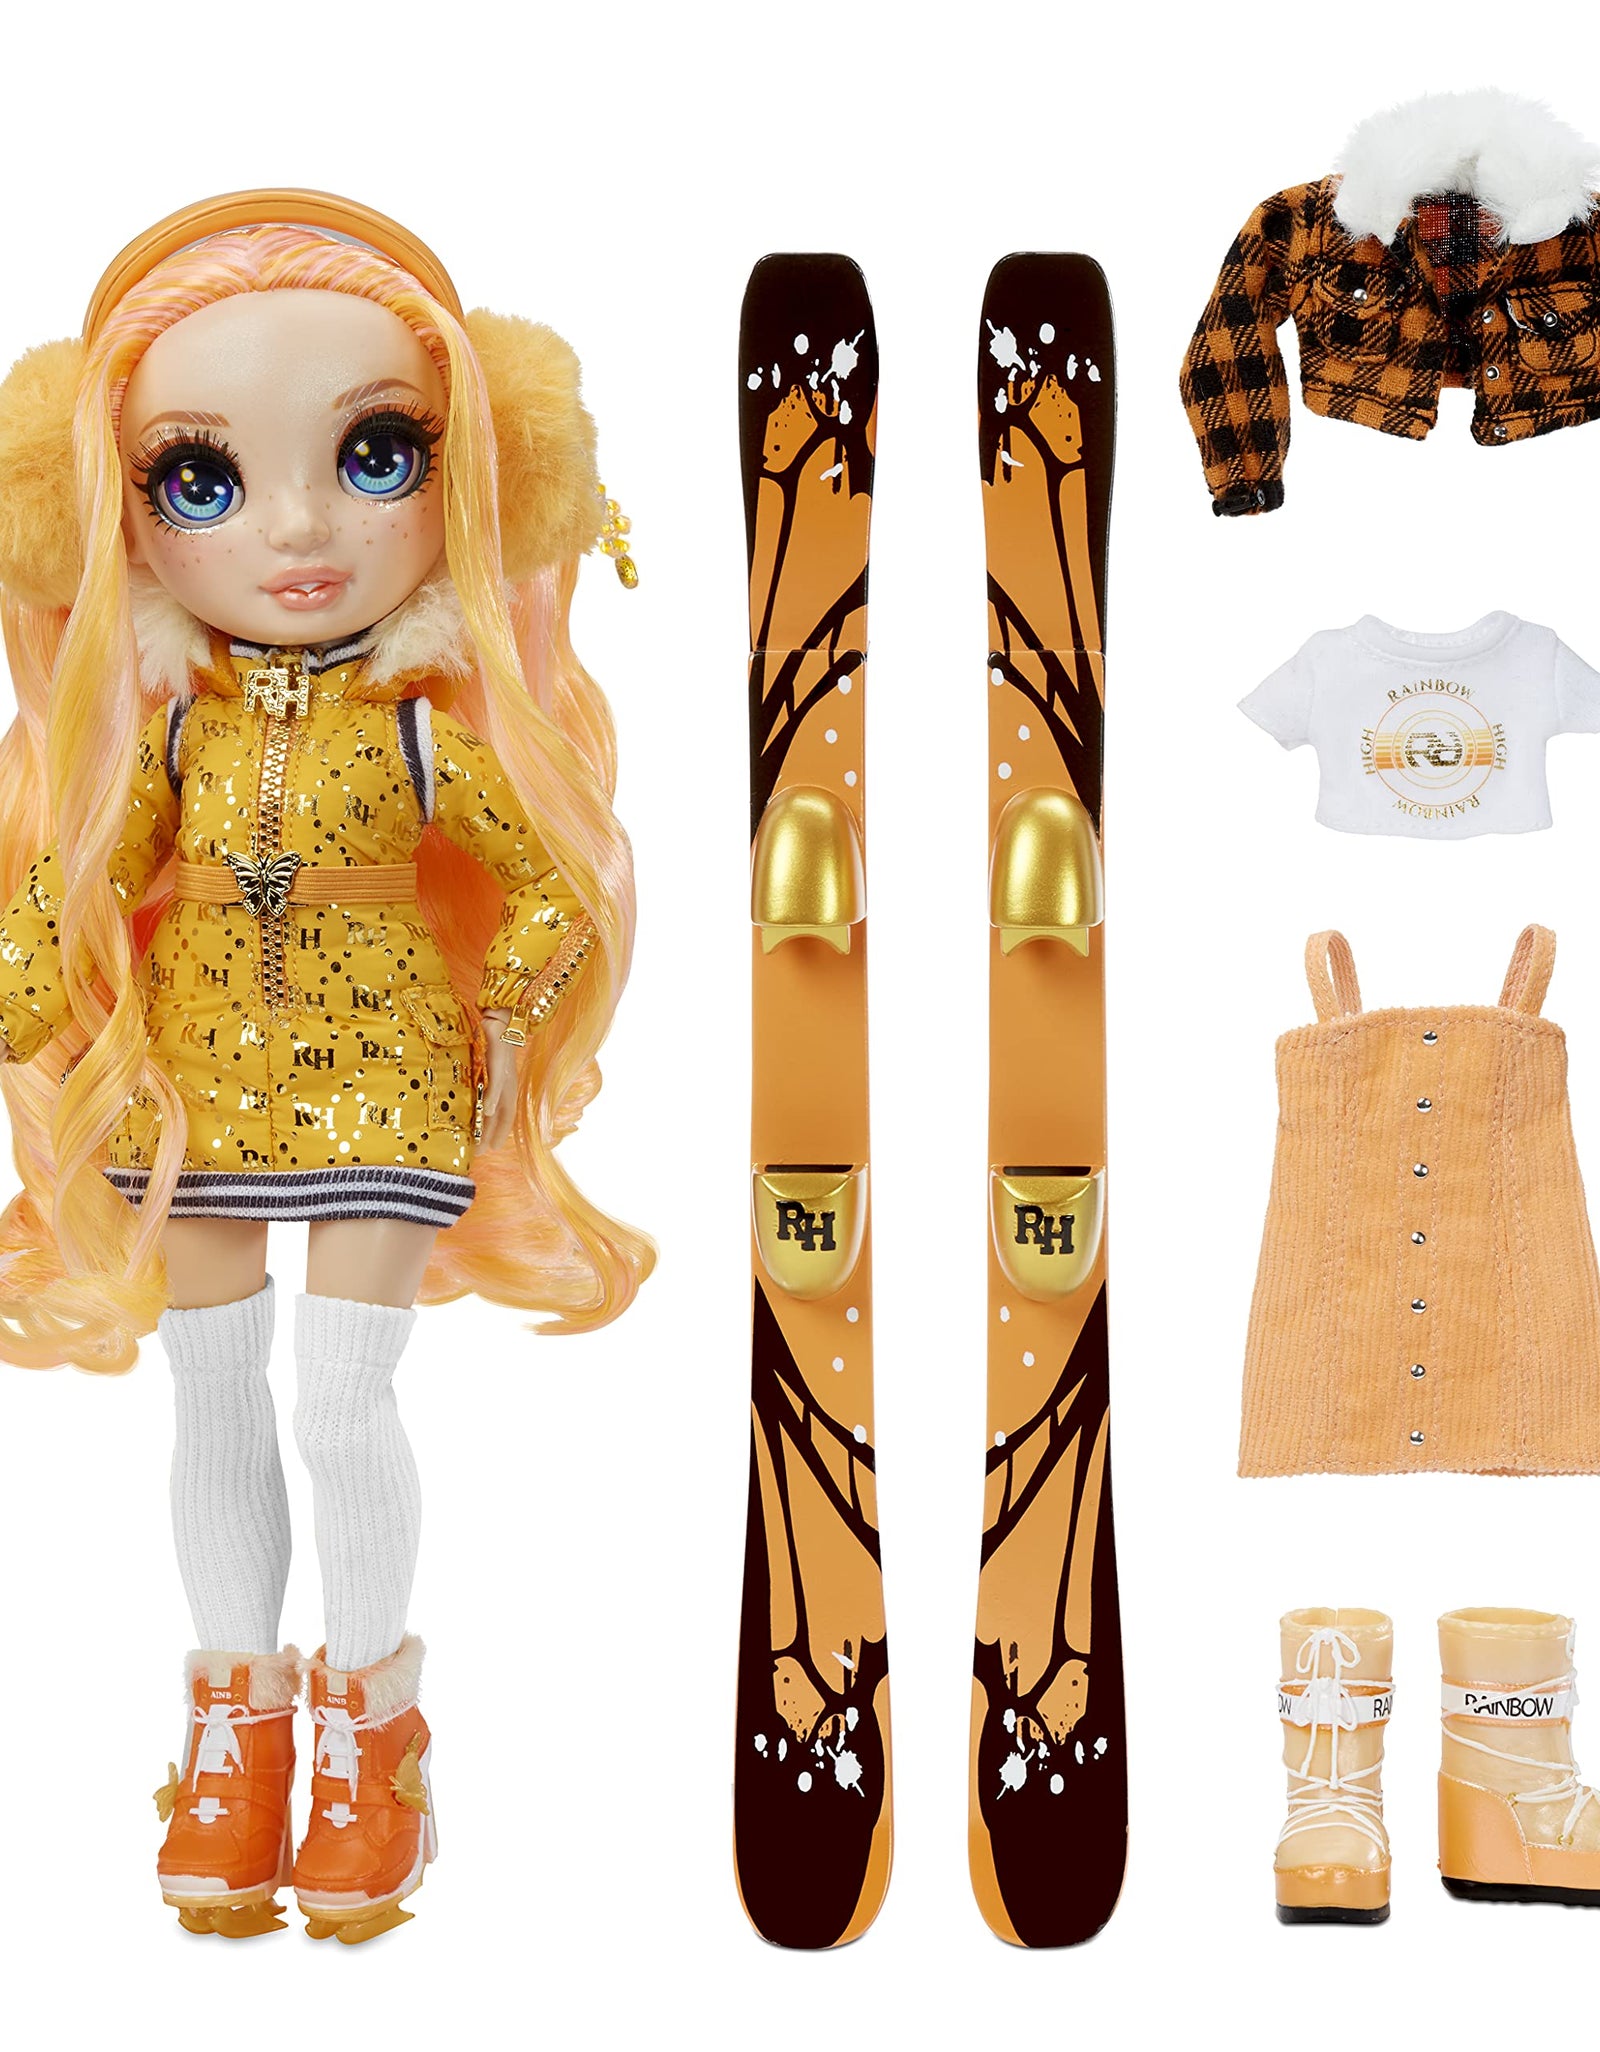 Rainbow High Winter Break Poppy Rowan – Orange Fashion Doll and Playset with 2 Designer Outfits, Pair of Skis and Accessories, Gift for Kids and Collectors, Toys for Kids Ages 6 7 8+ to 12 Years Old